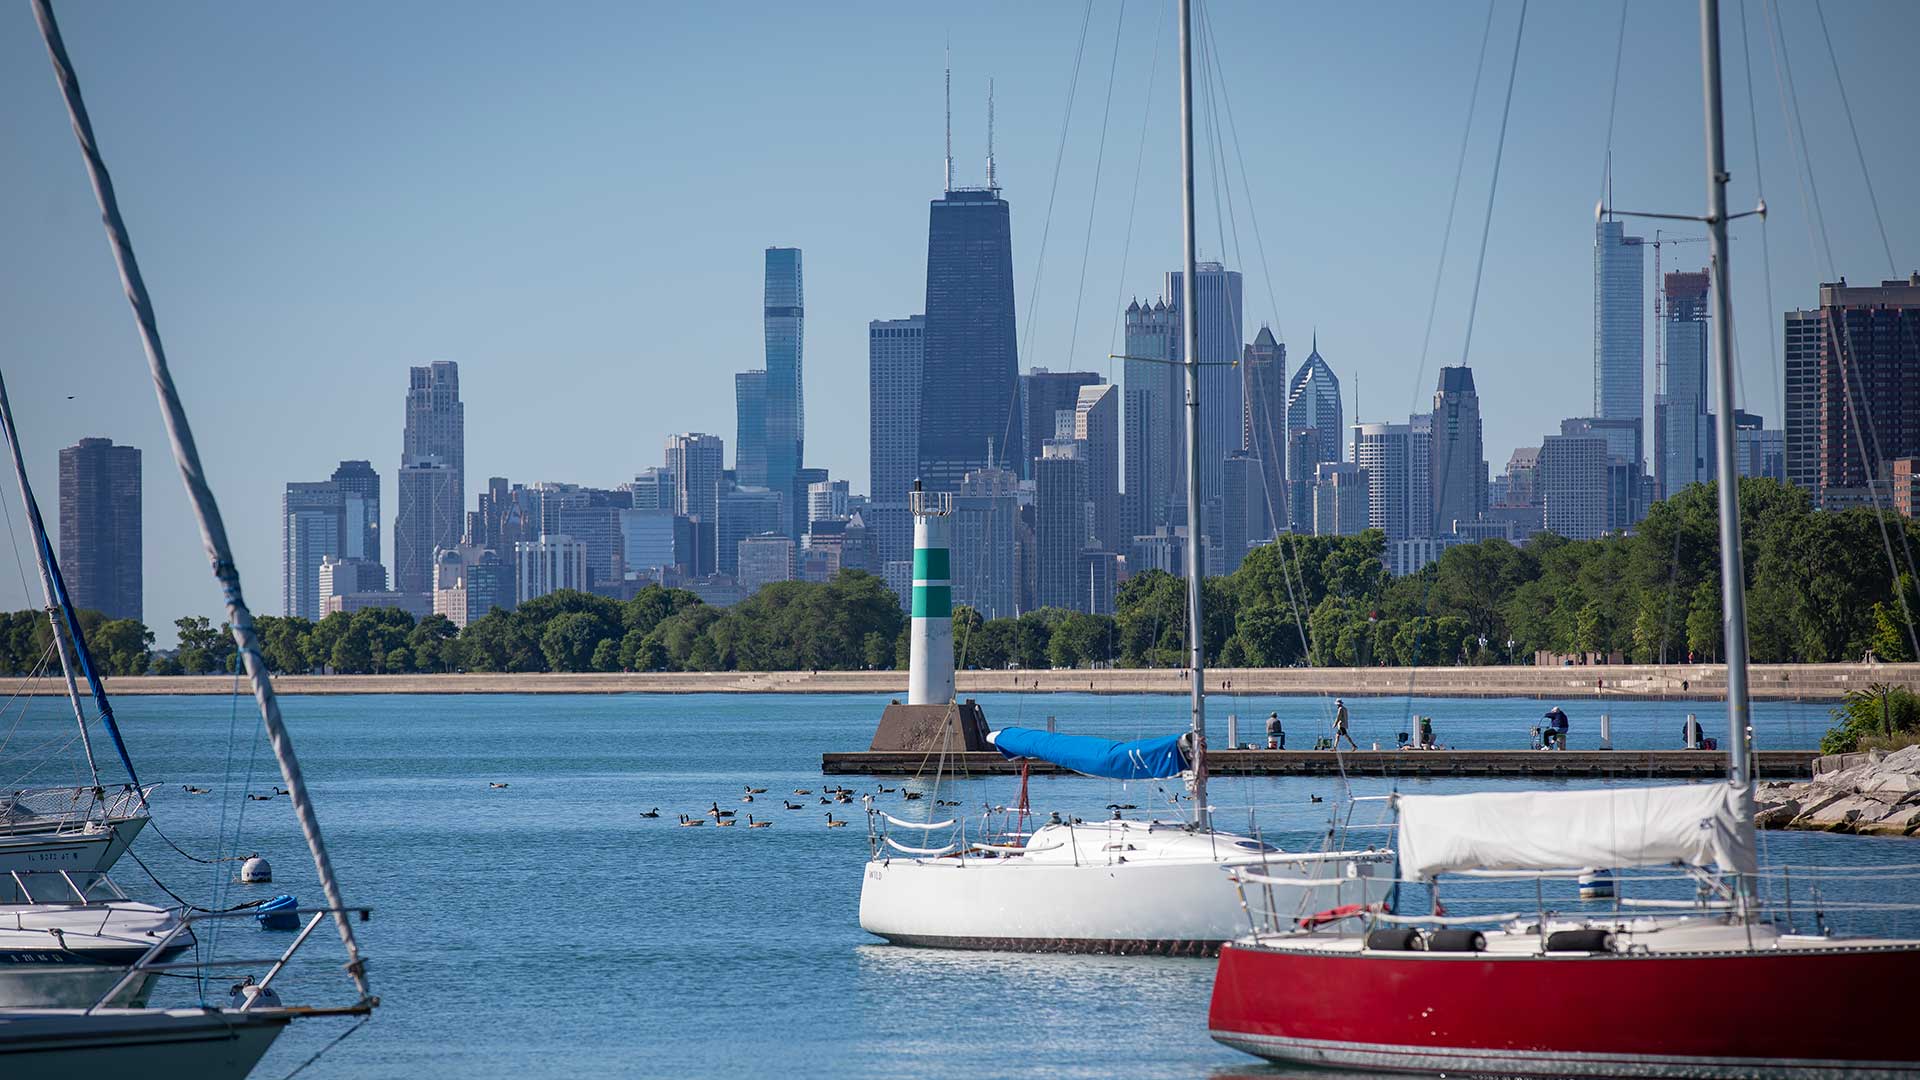 Several sailboats are floating on Lake Michigan in the foreground. The Chicago skyline is seen in the background, on the horizon.